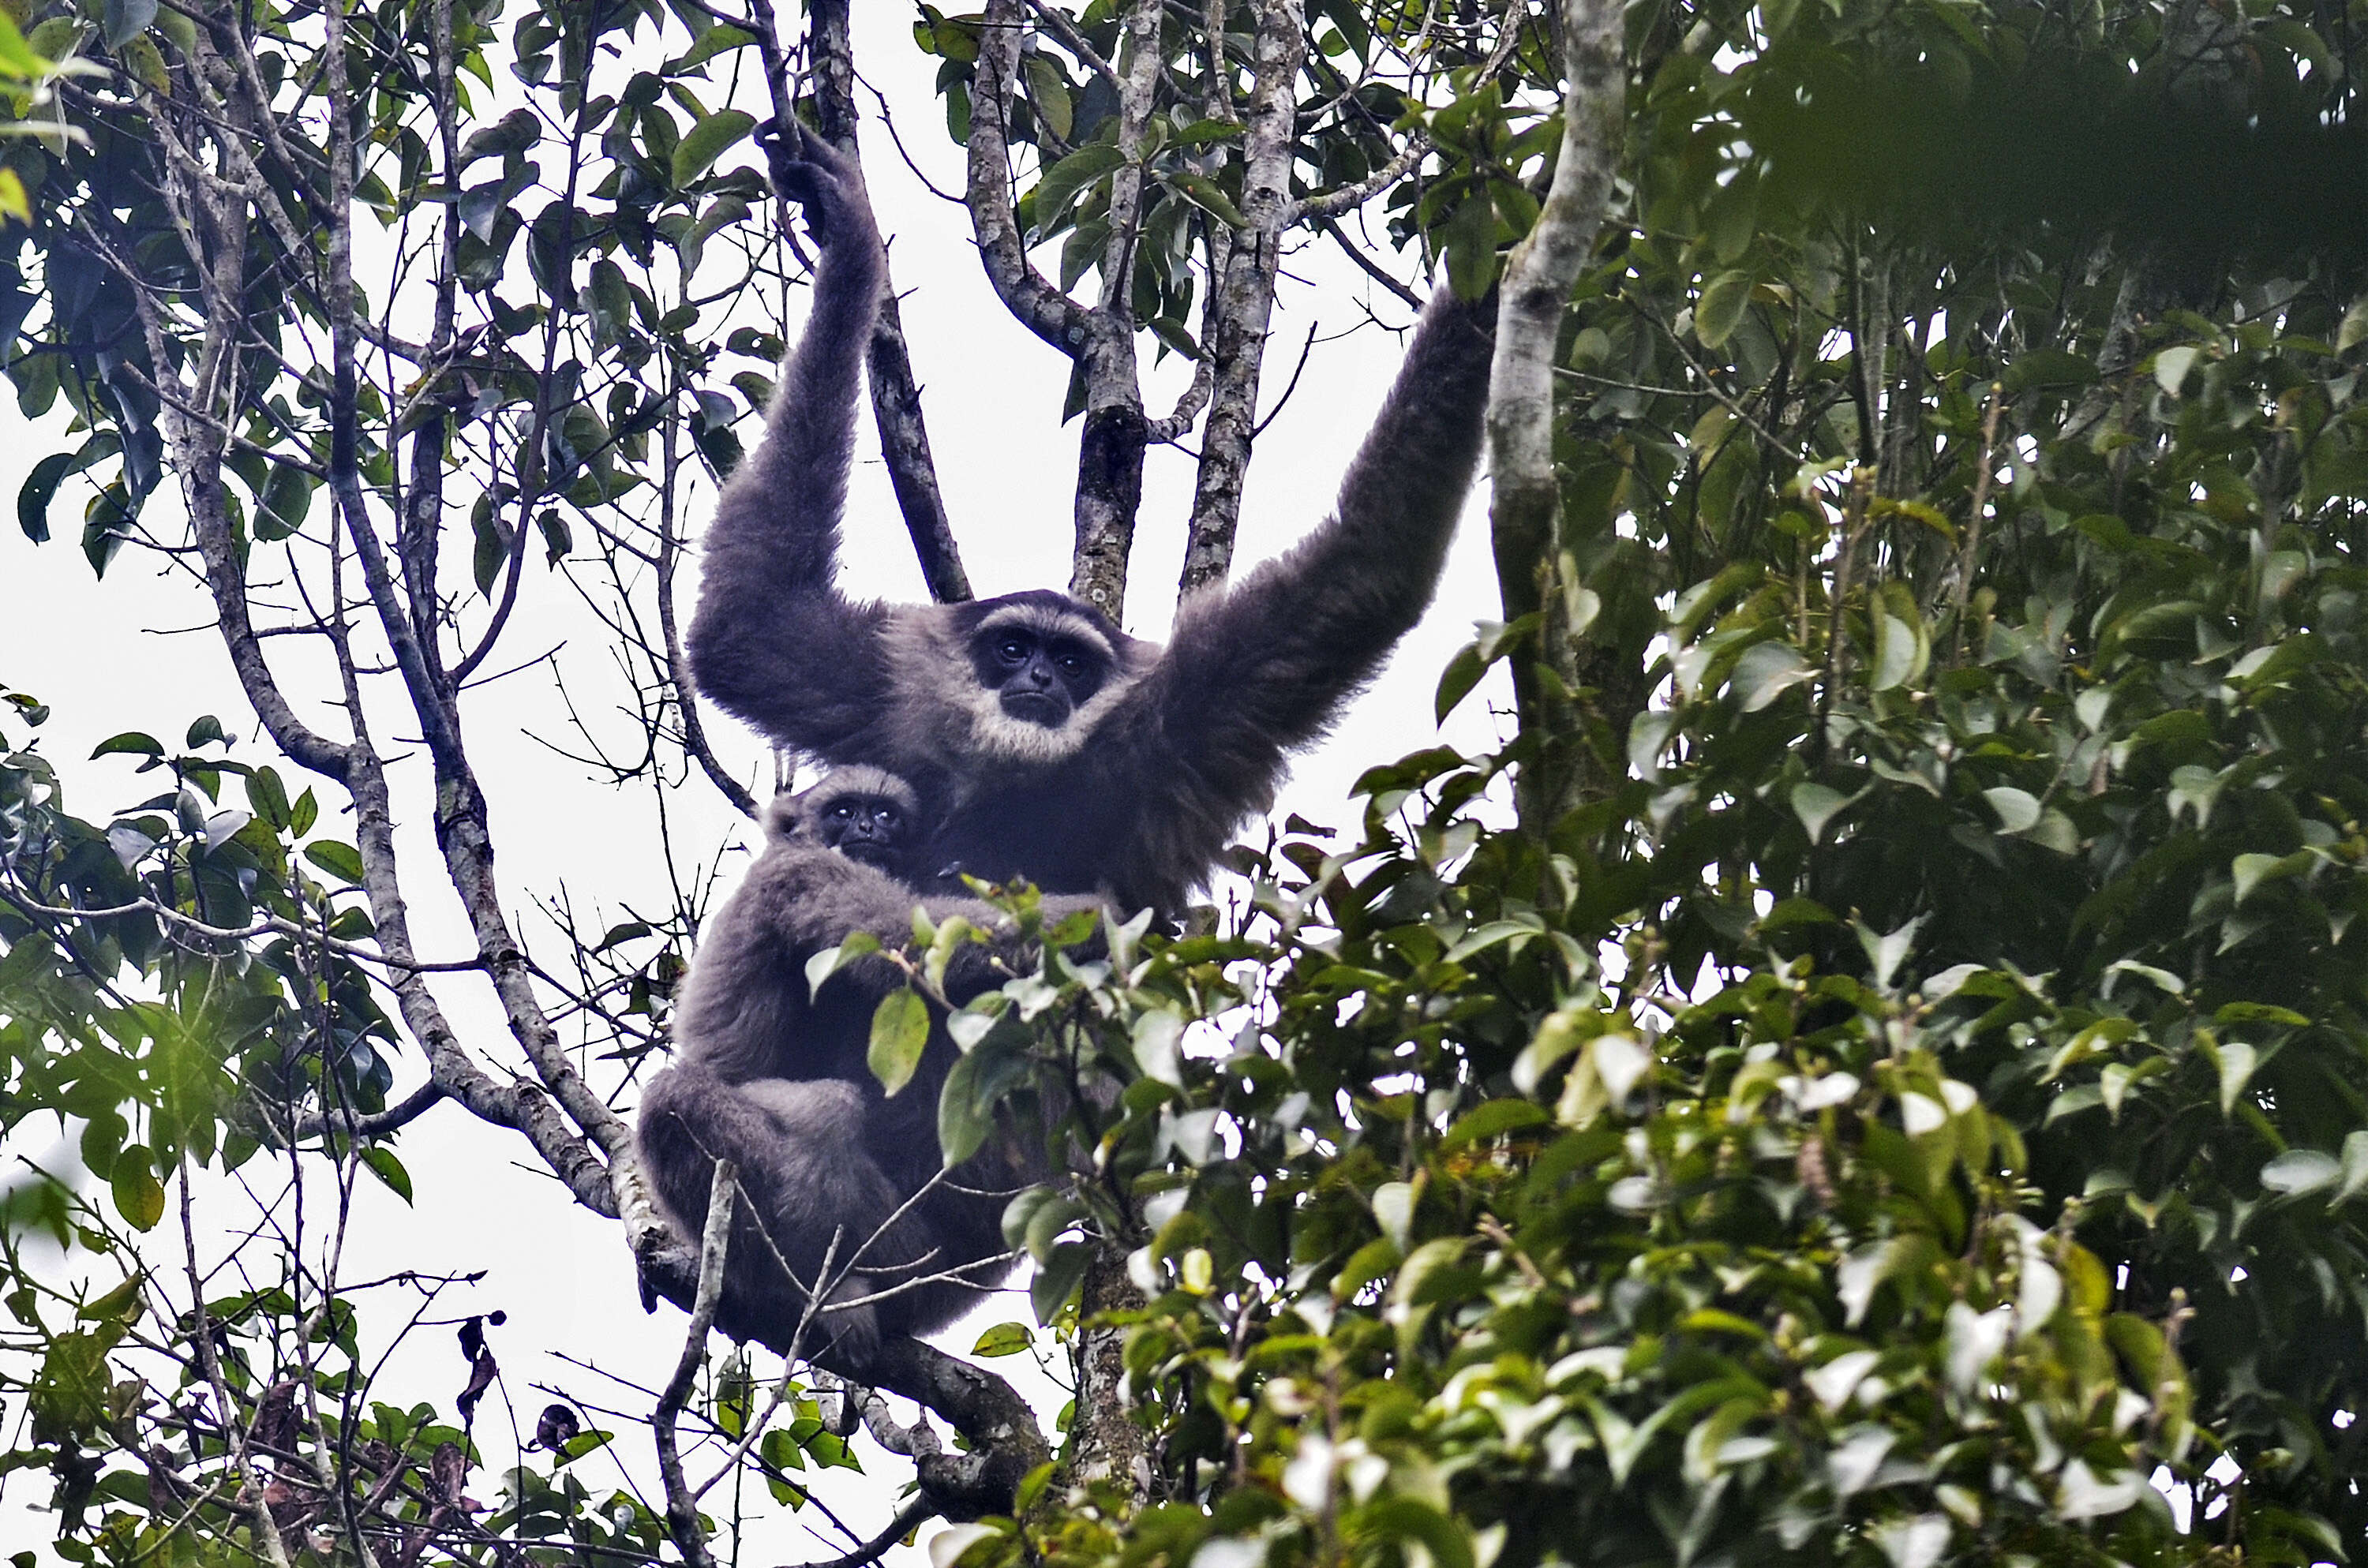 Image of silvery gibbon